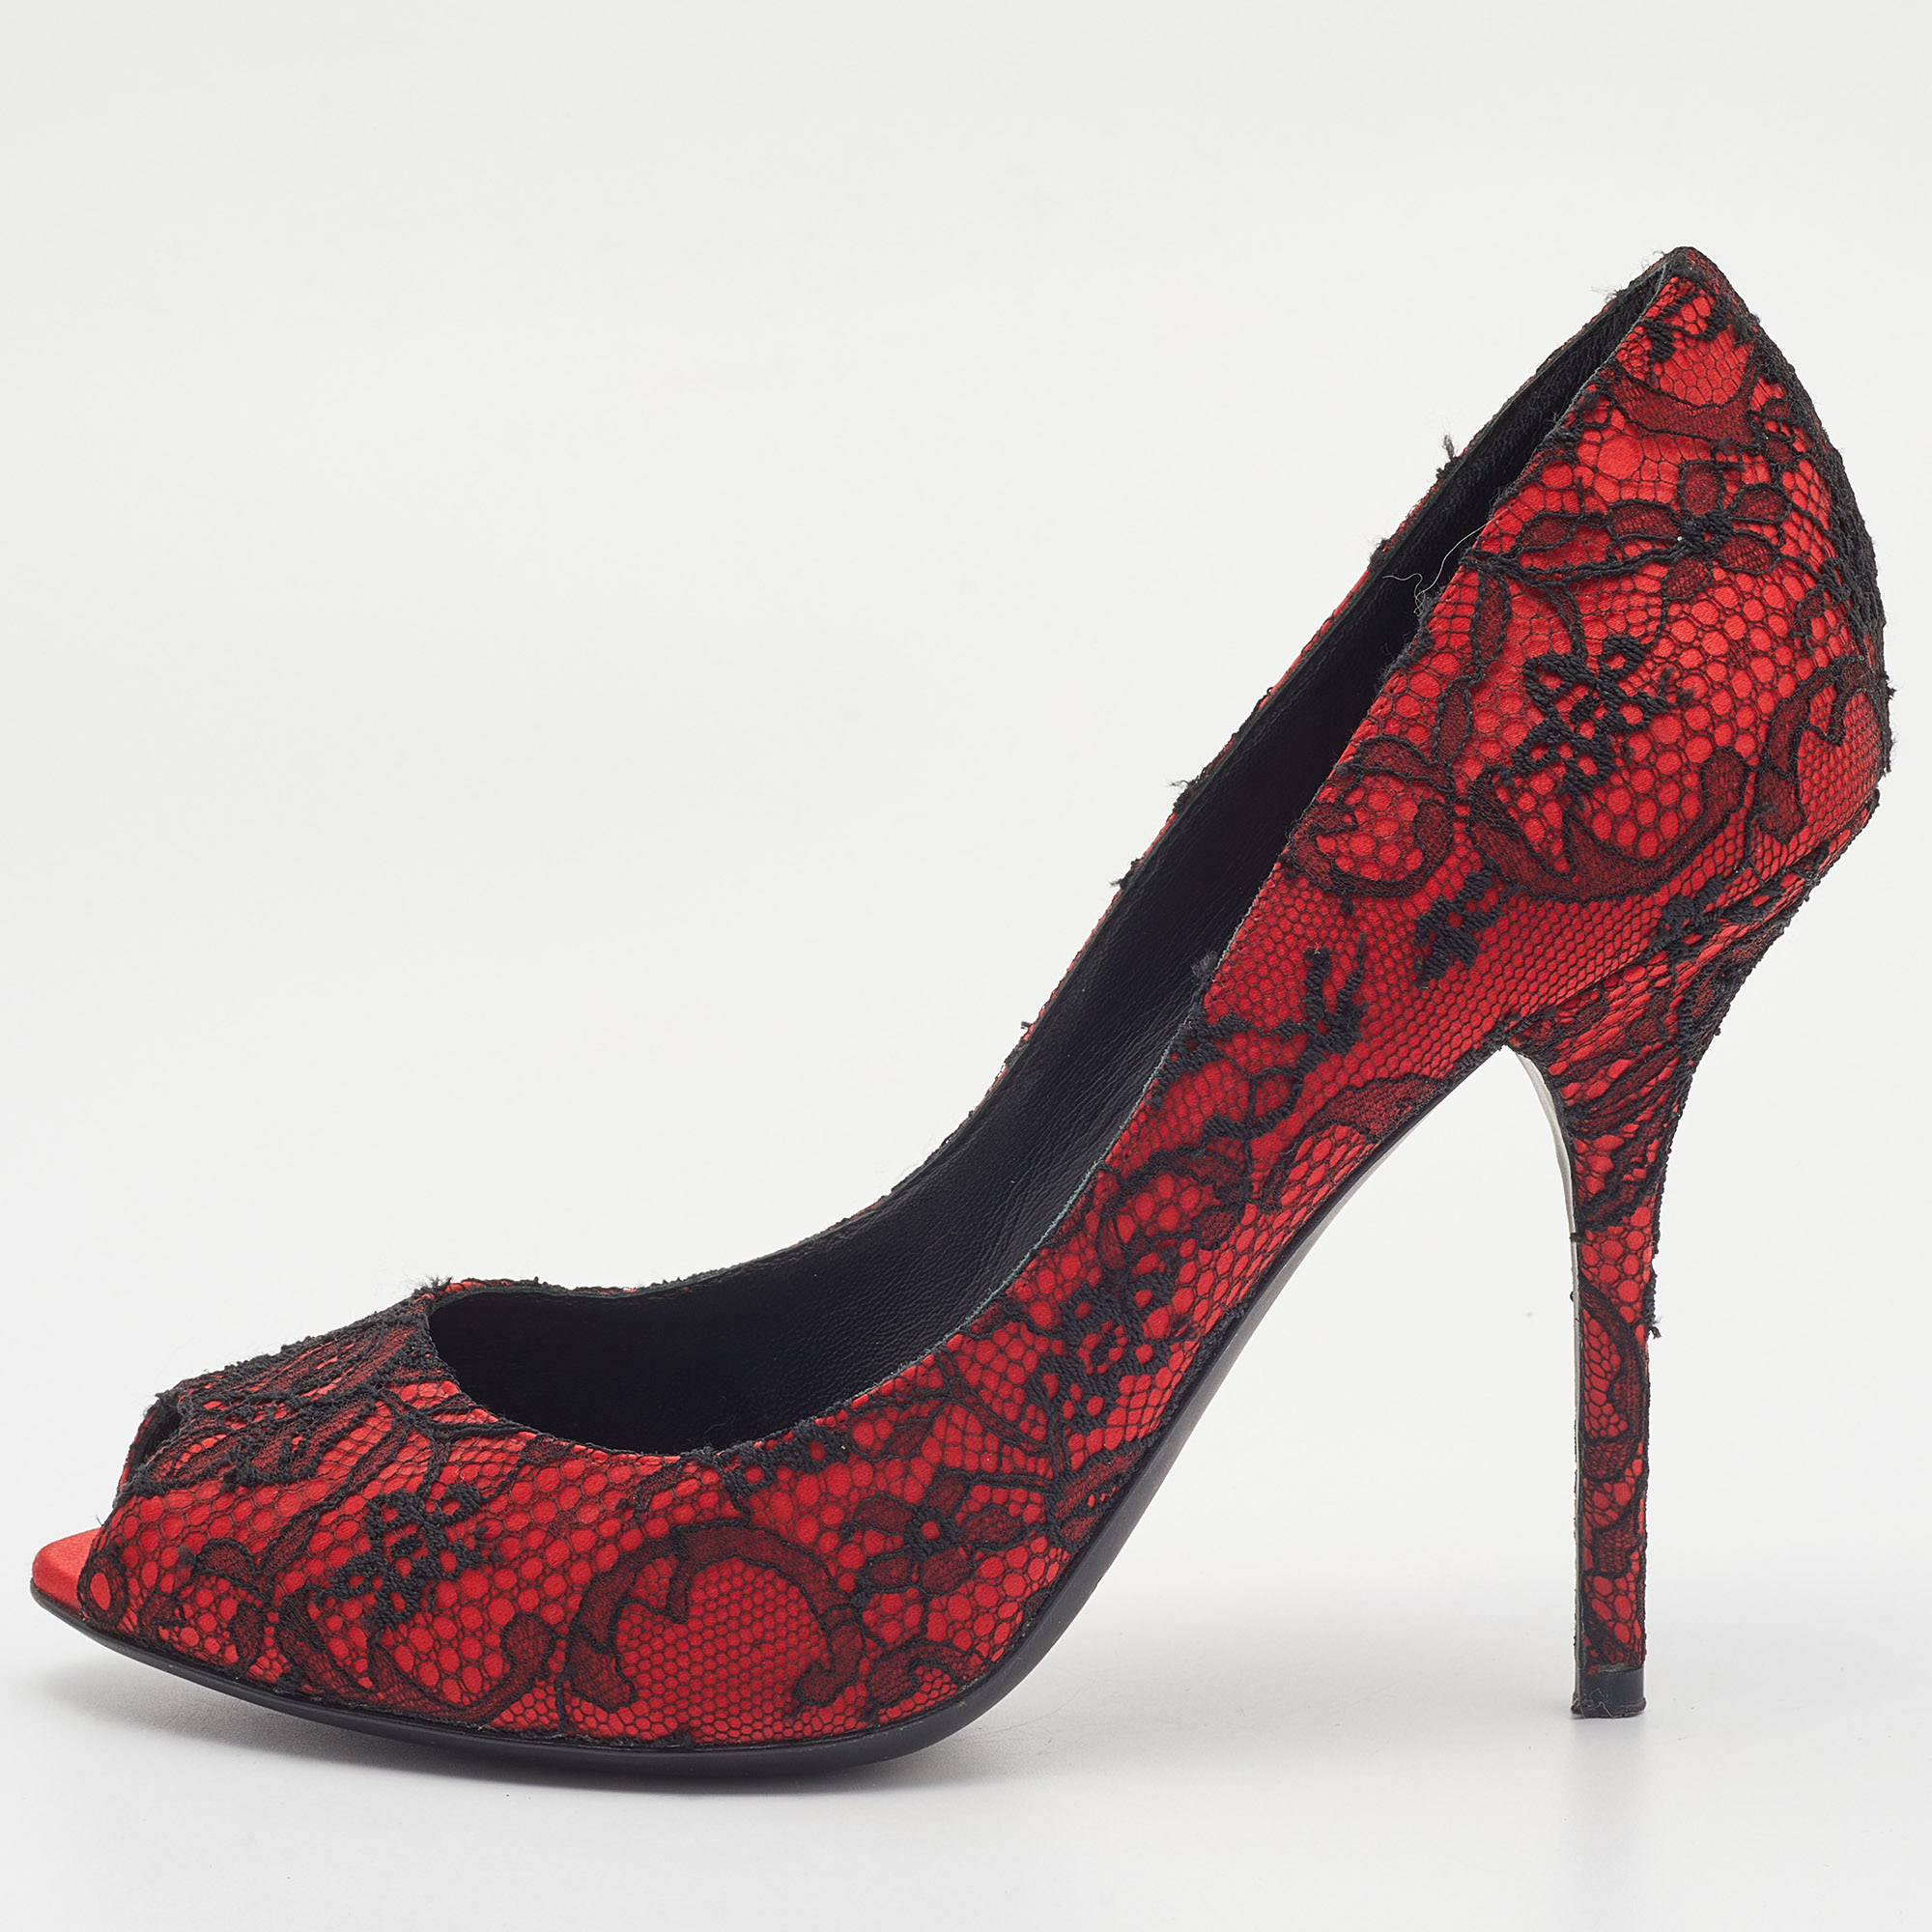 Dolce & Gabbana Red/Black Satin And Lace Peep Toe Pumps Size 40